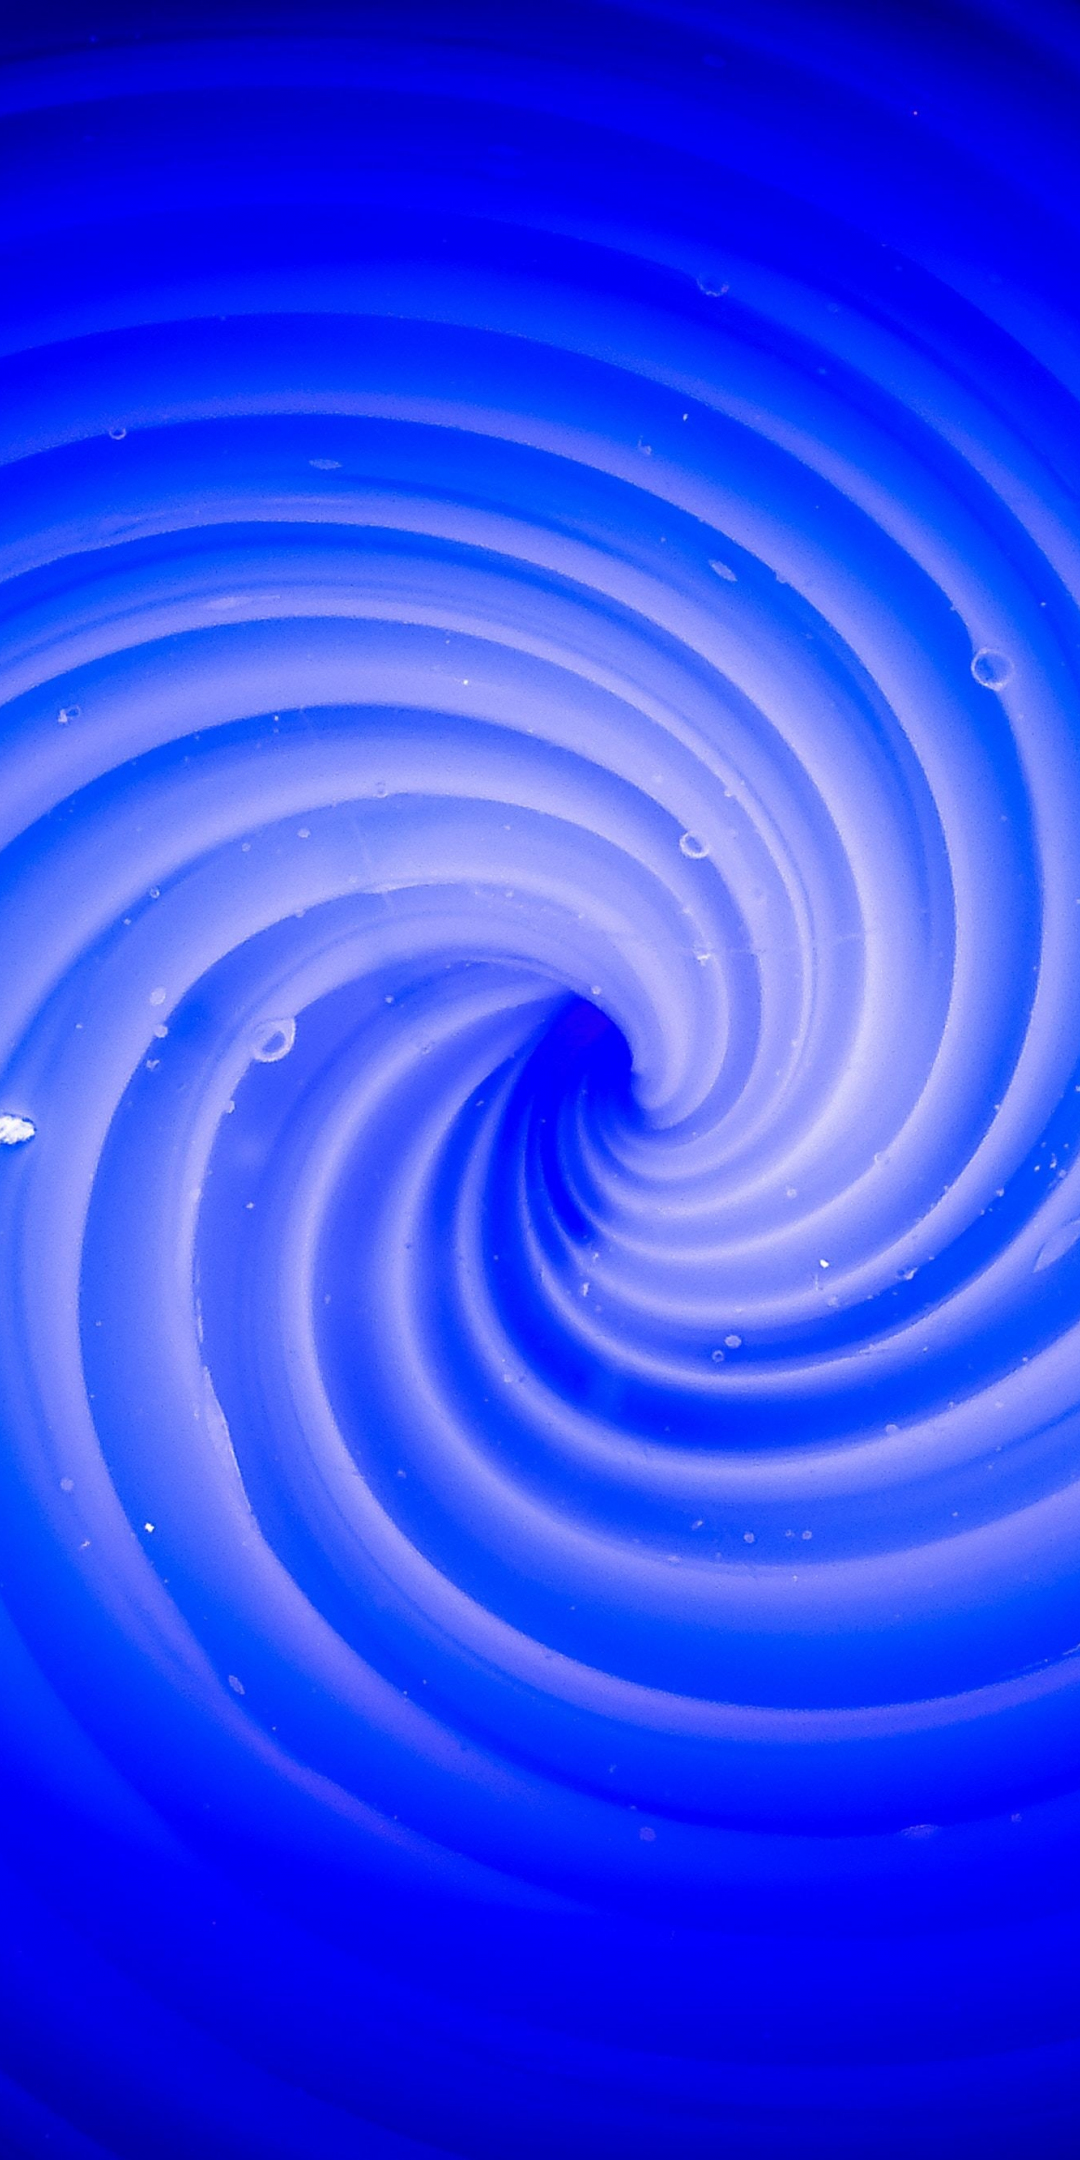 Abstraction, blue swirl, abstract, 1080x2160 wallpaper